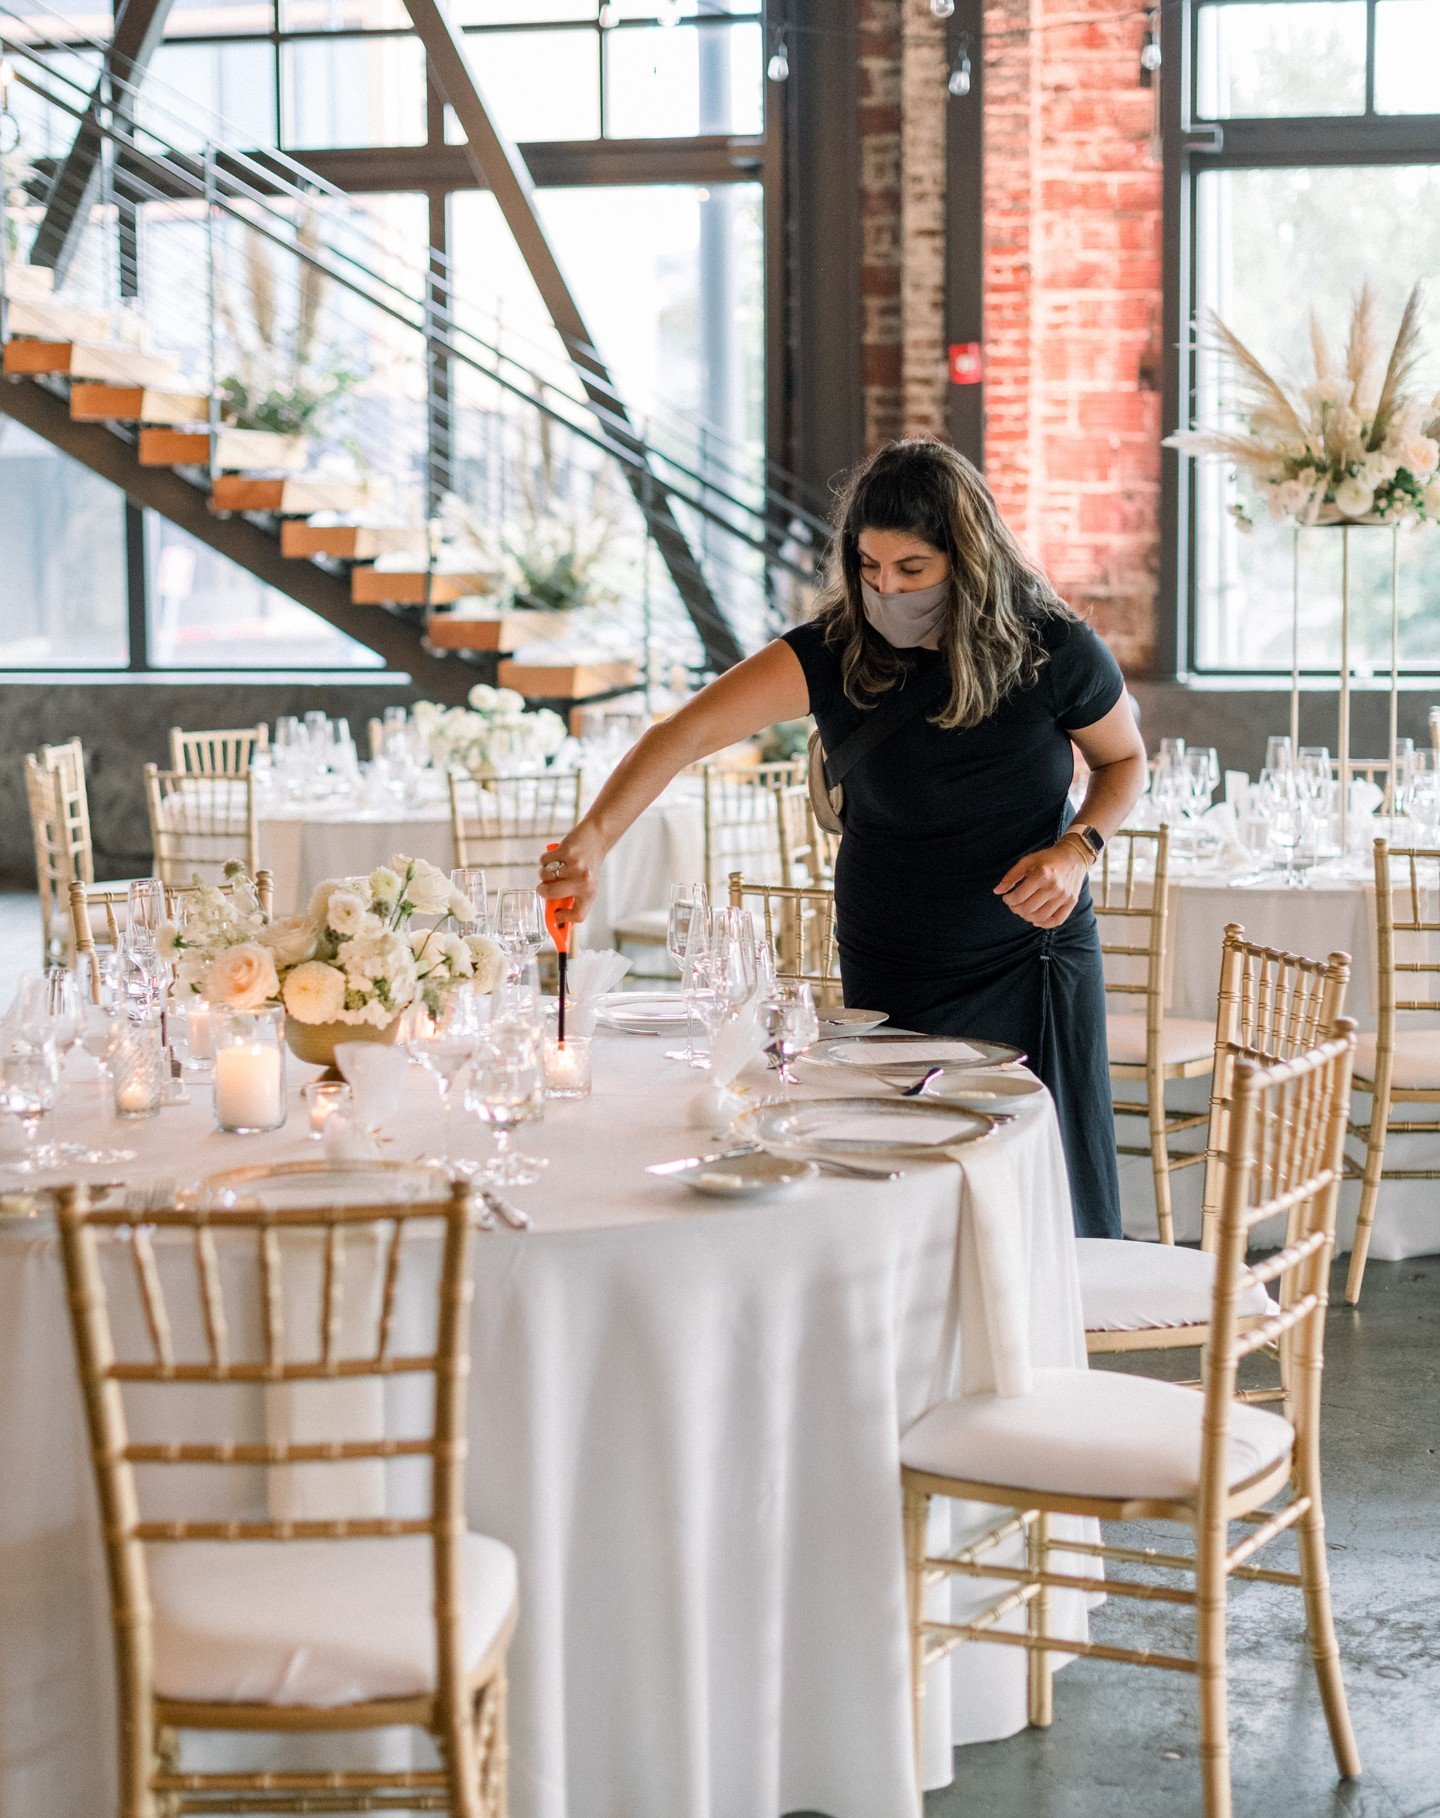 It's always a pleasure working with the talented ladies at Bridal Bliss! If you're in need of a wedding planner, we recommend checking them out. 

P.S. Fun fact; one of their lead planners actually got married at Leftbank Annex! 
.
.
.
Photography: @